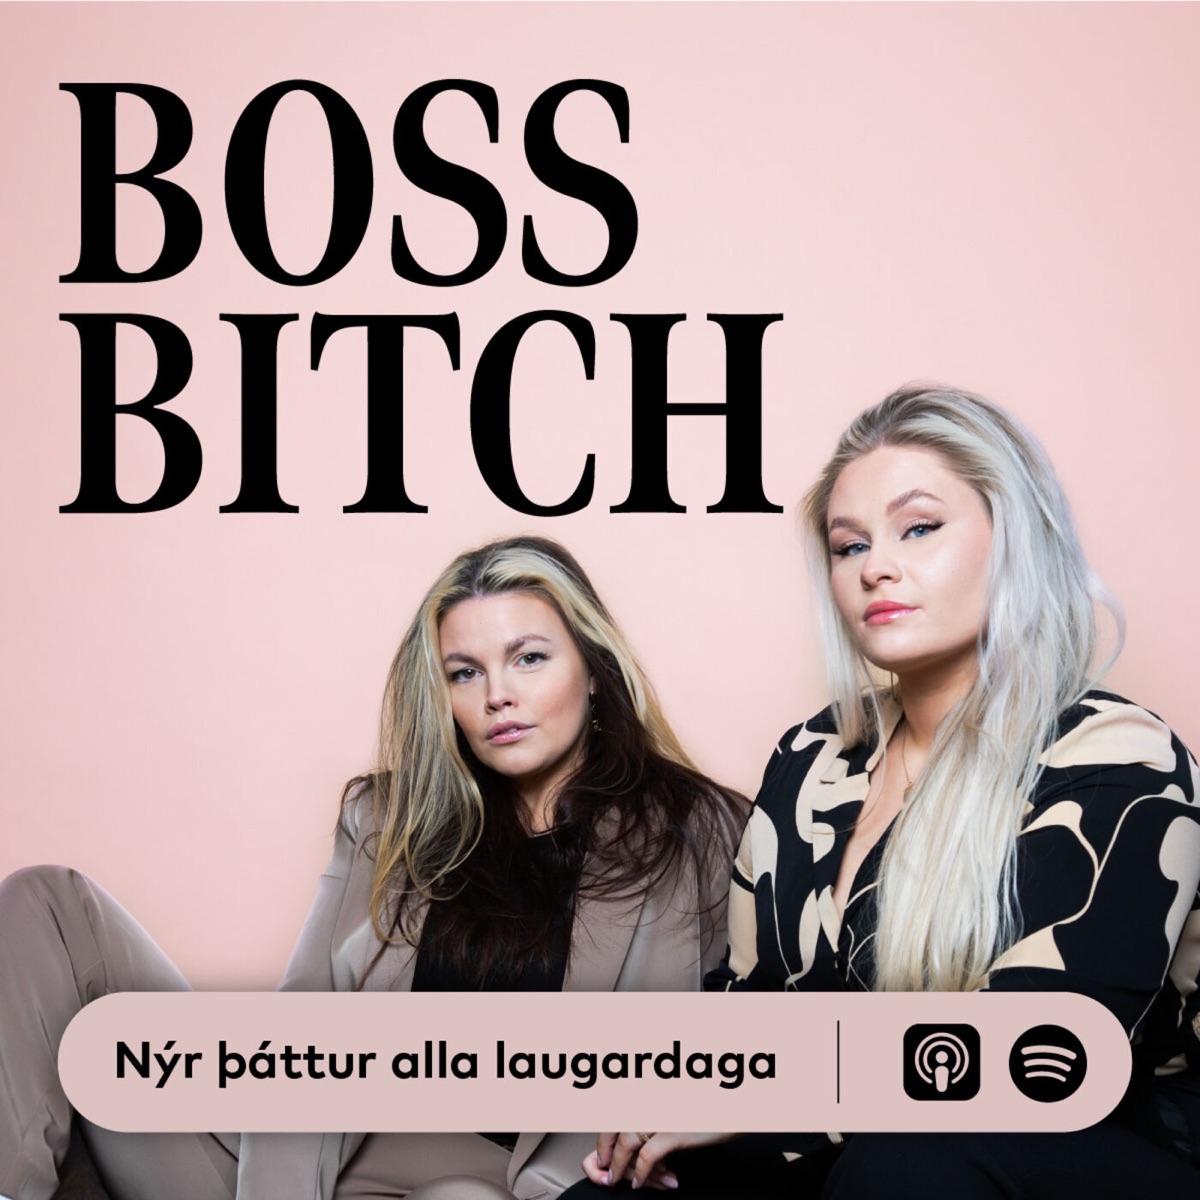 THE BOSS BITCH SHOW TO LAUNCH PODCAST IN JULY